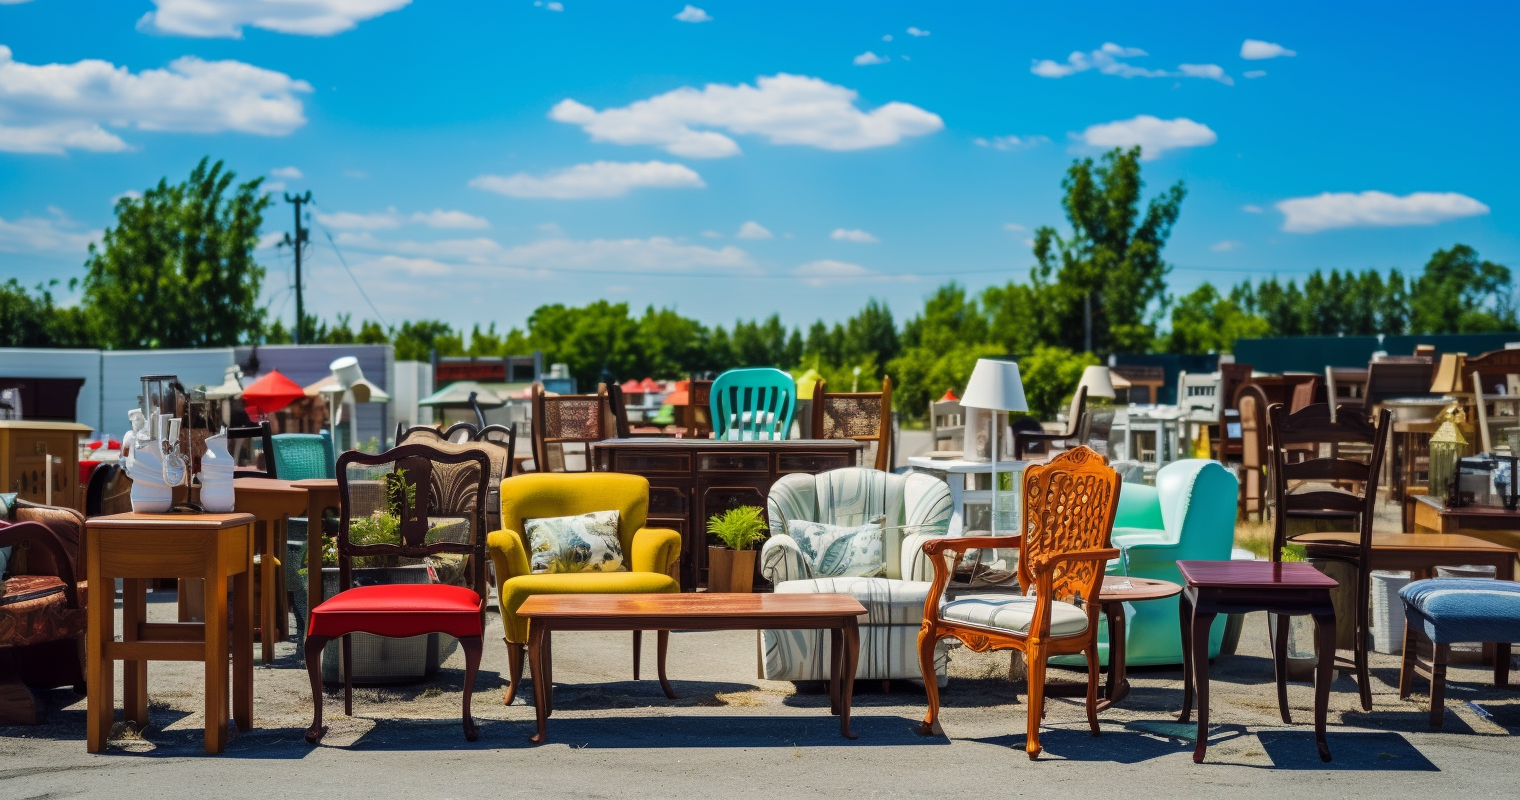 Diverse Furniture Collection at Outdoor Marketplace